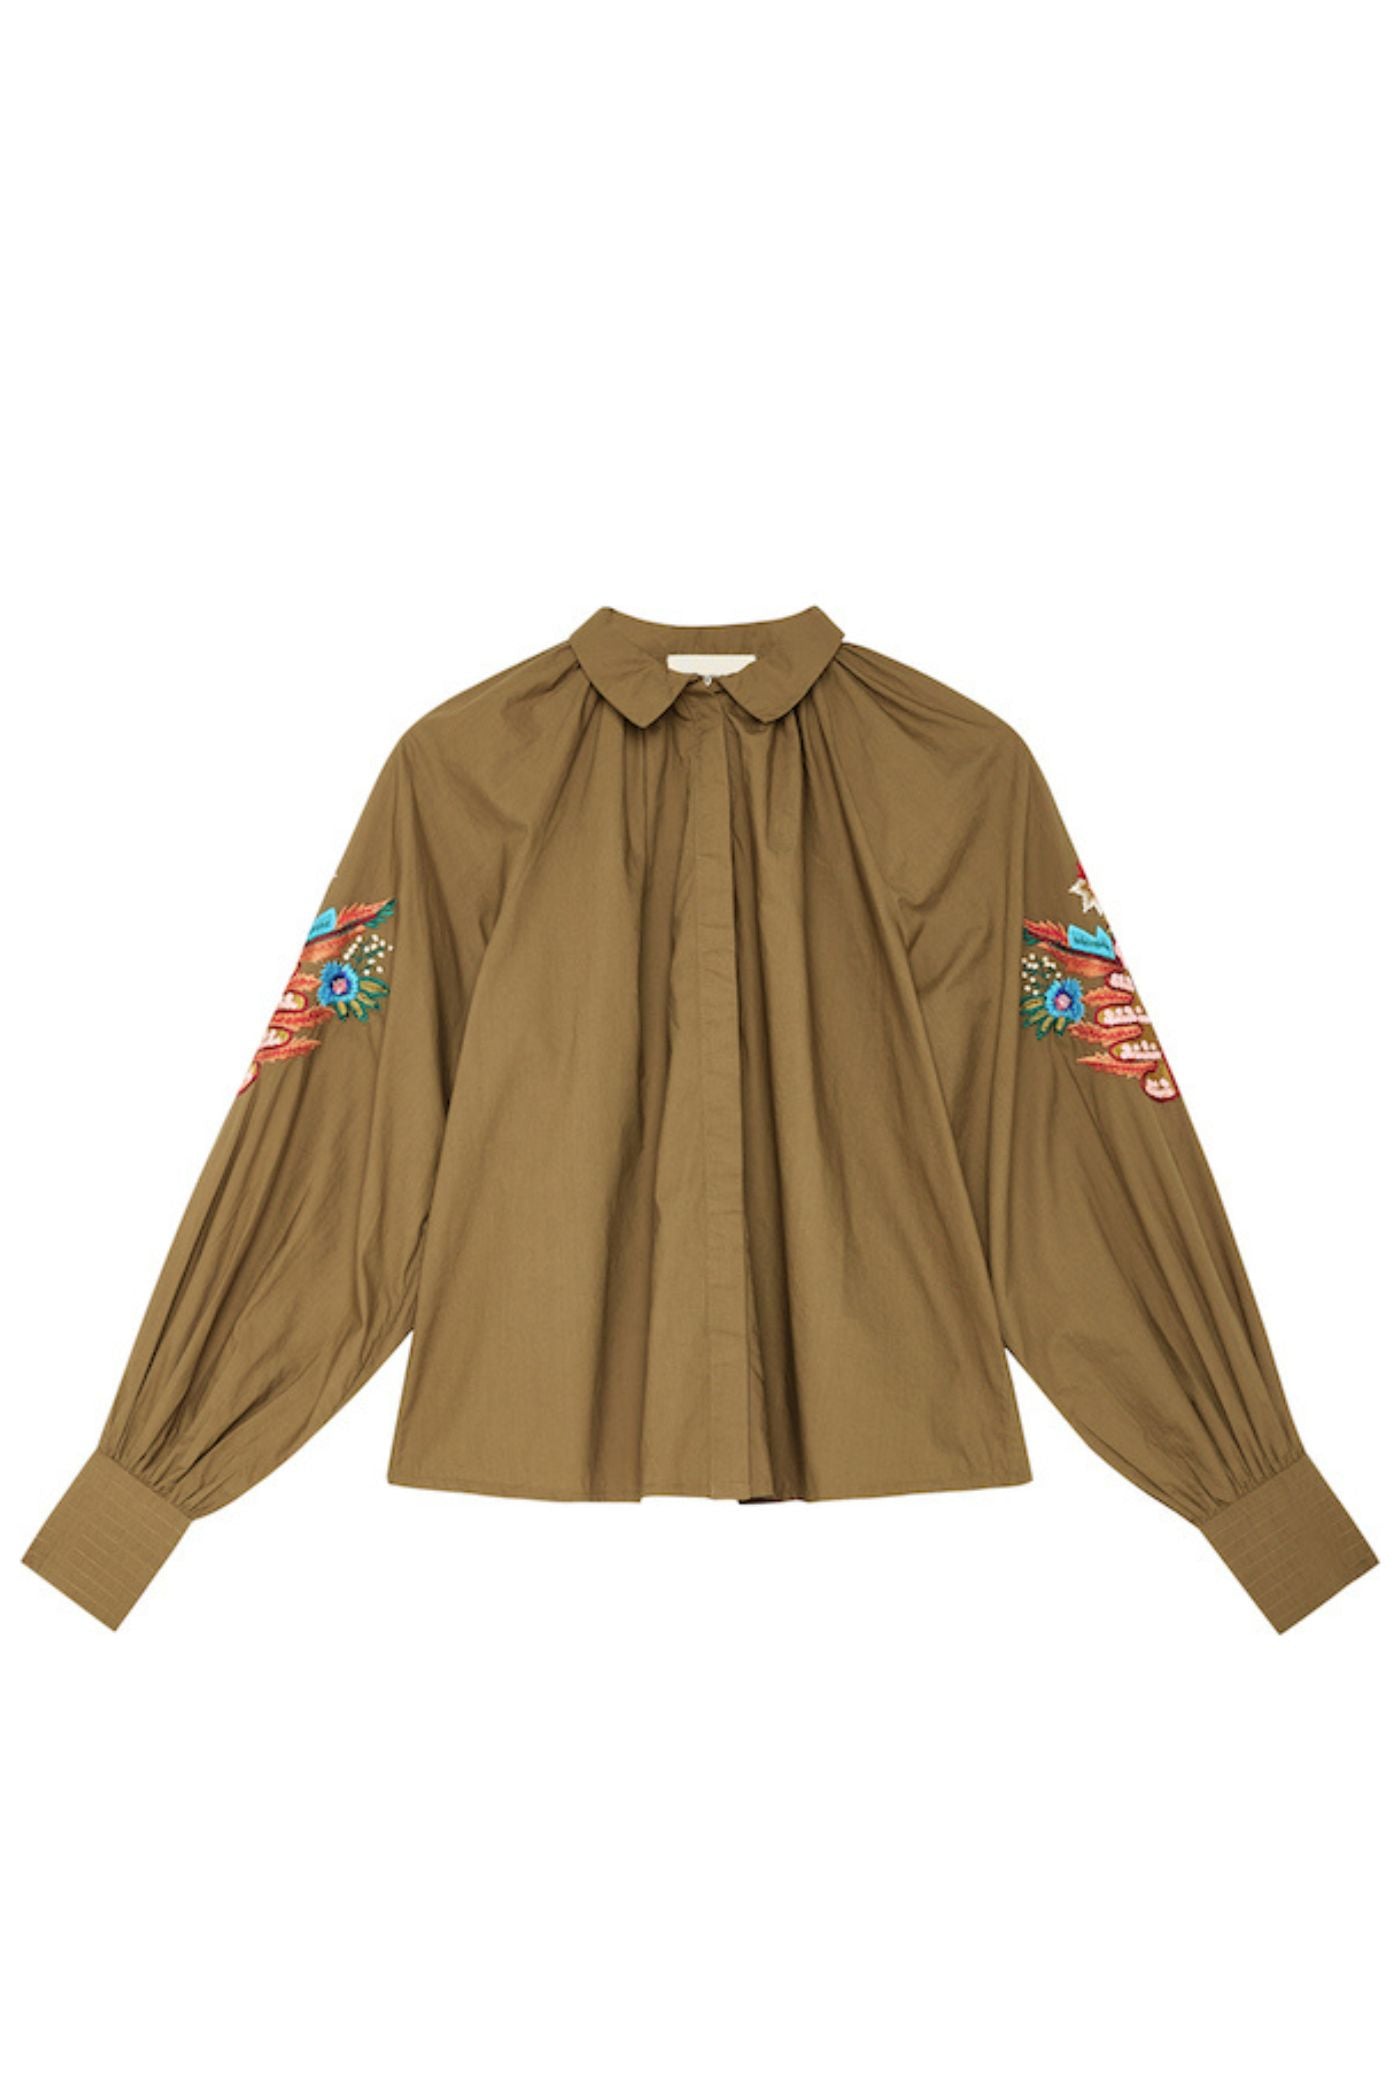 Lily khaki blouse with embroidered sleeves